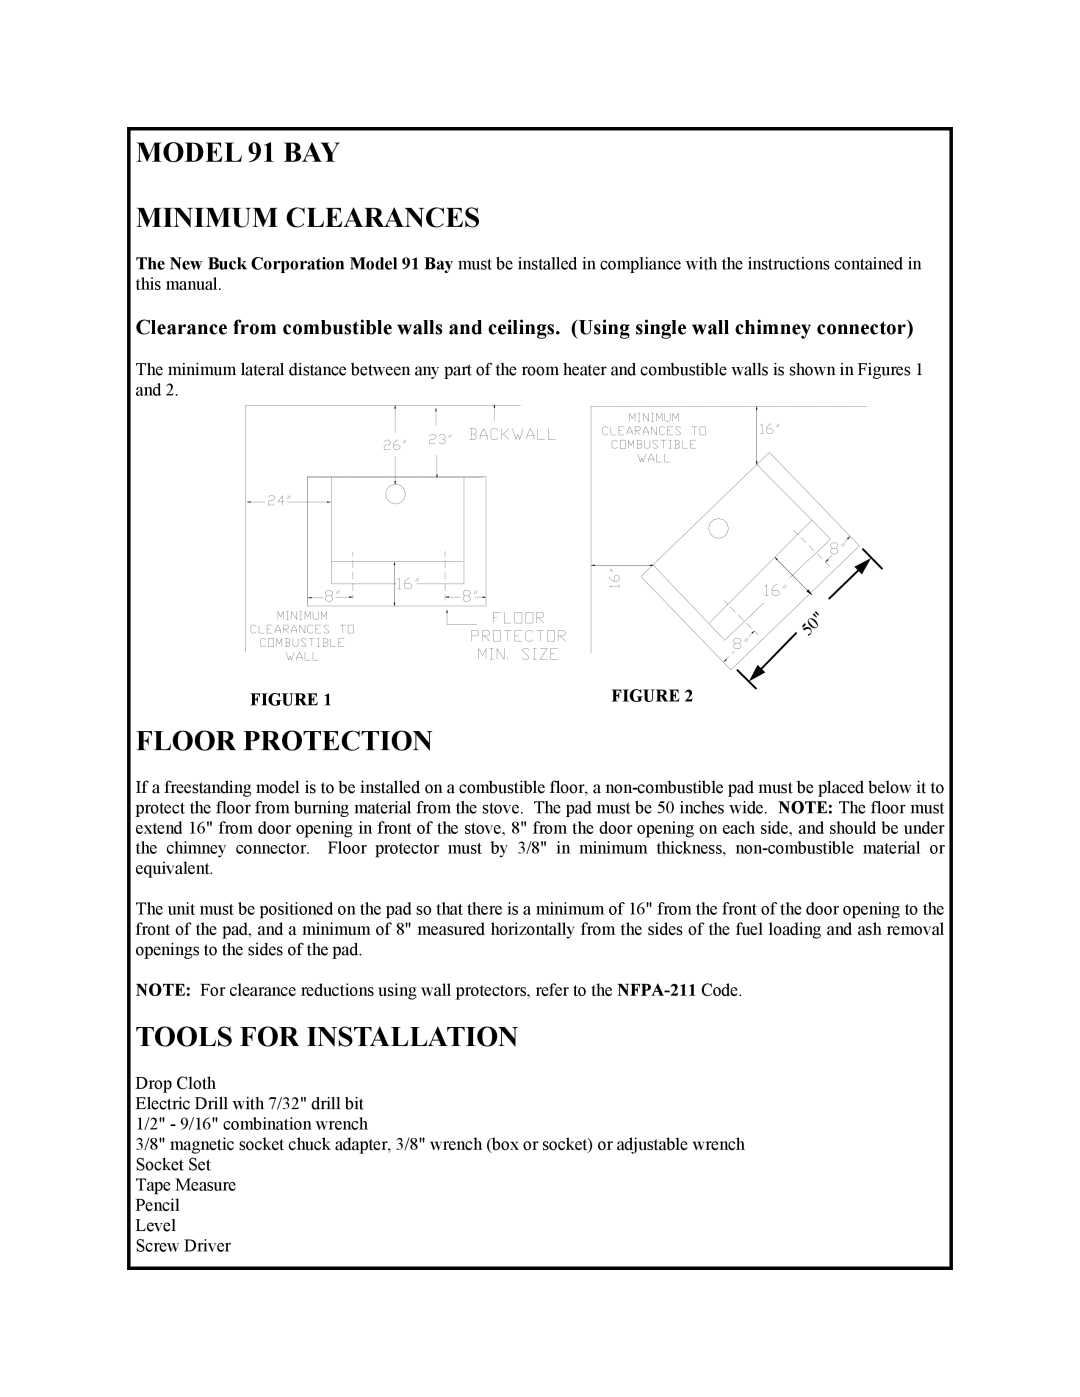 New Buck Corporation manual MODEL 91 BAY MINIMUM CLEARANCES, Floor Protection, Tools For Installation 